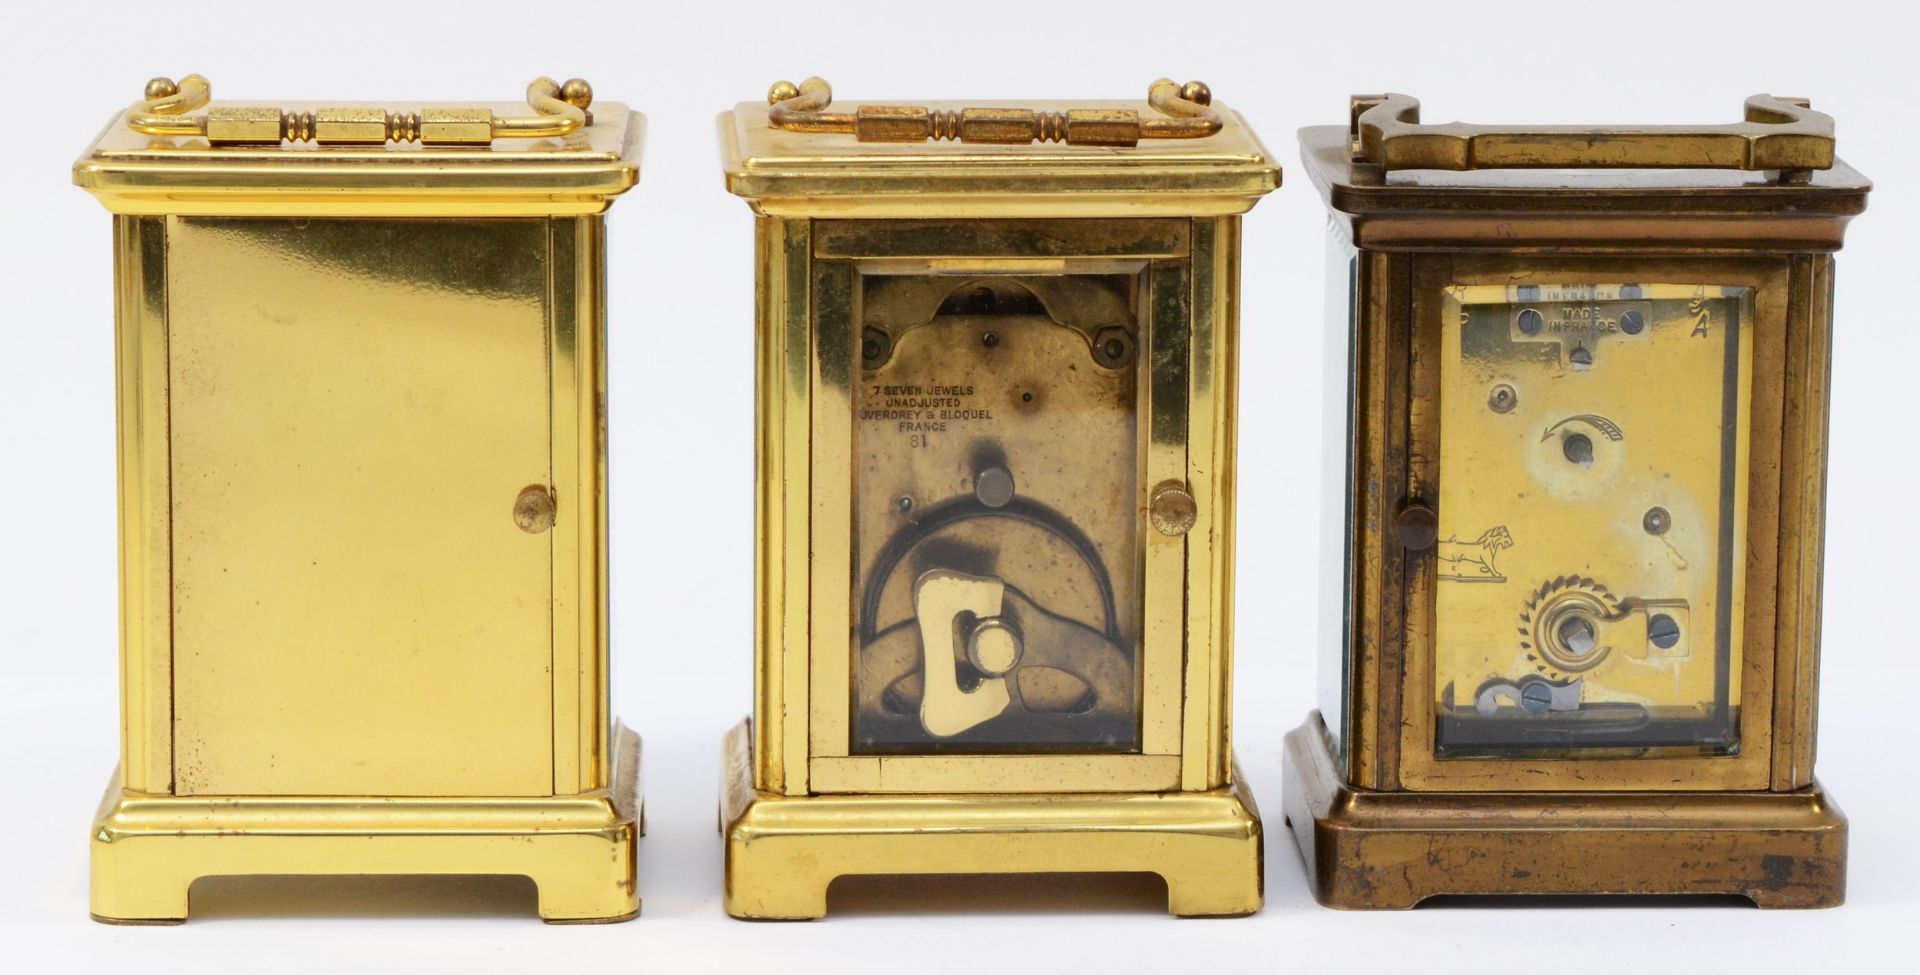 Three French 8 day carriage clocks, brass cased with enamelled dials and Roman numerals. (3) - Image 3 of 5